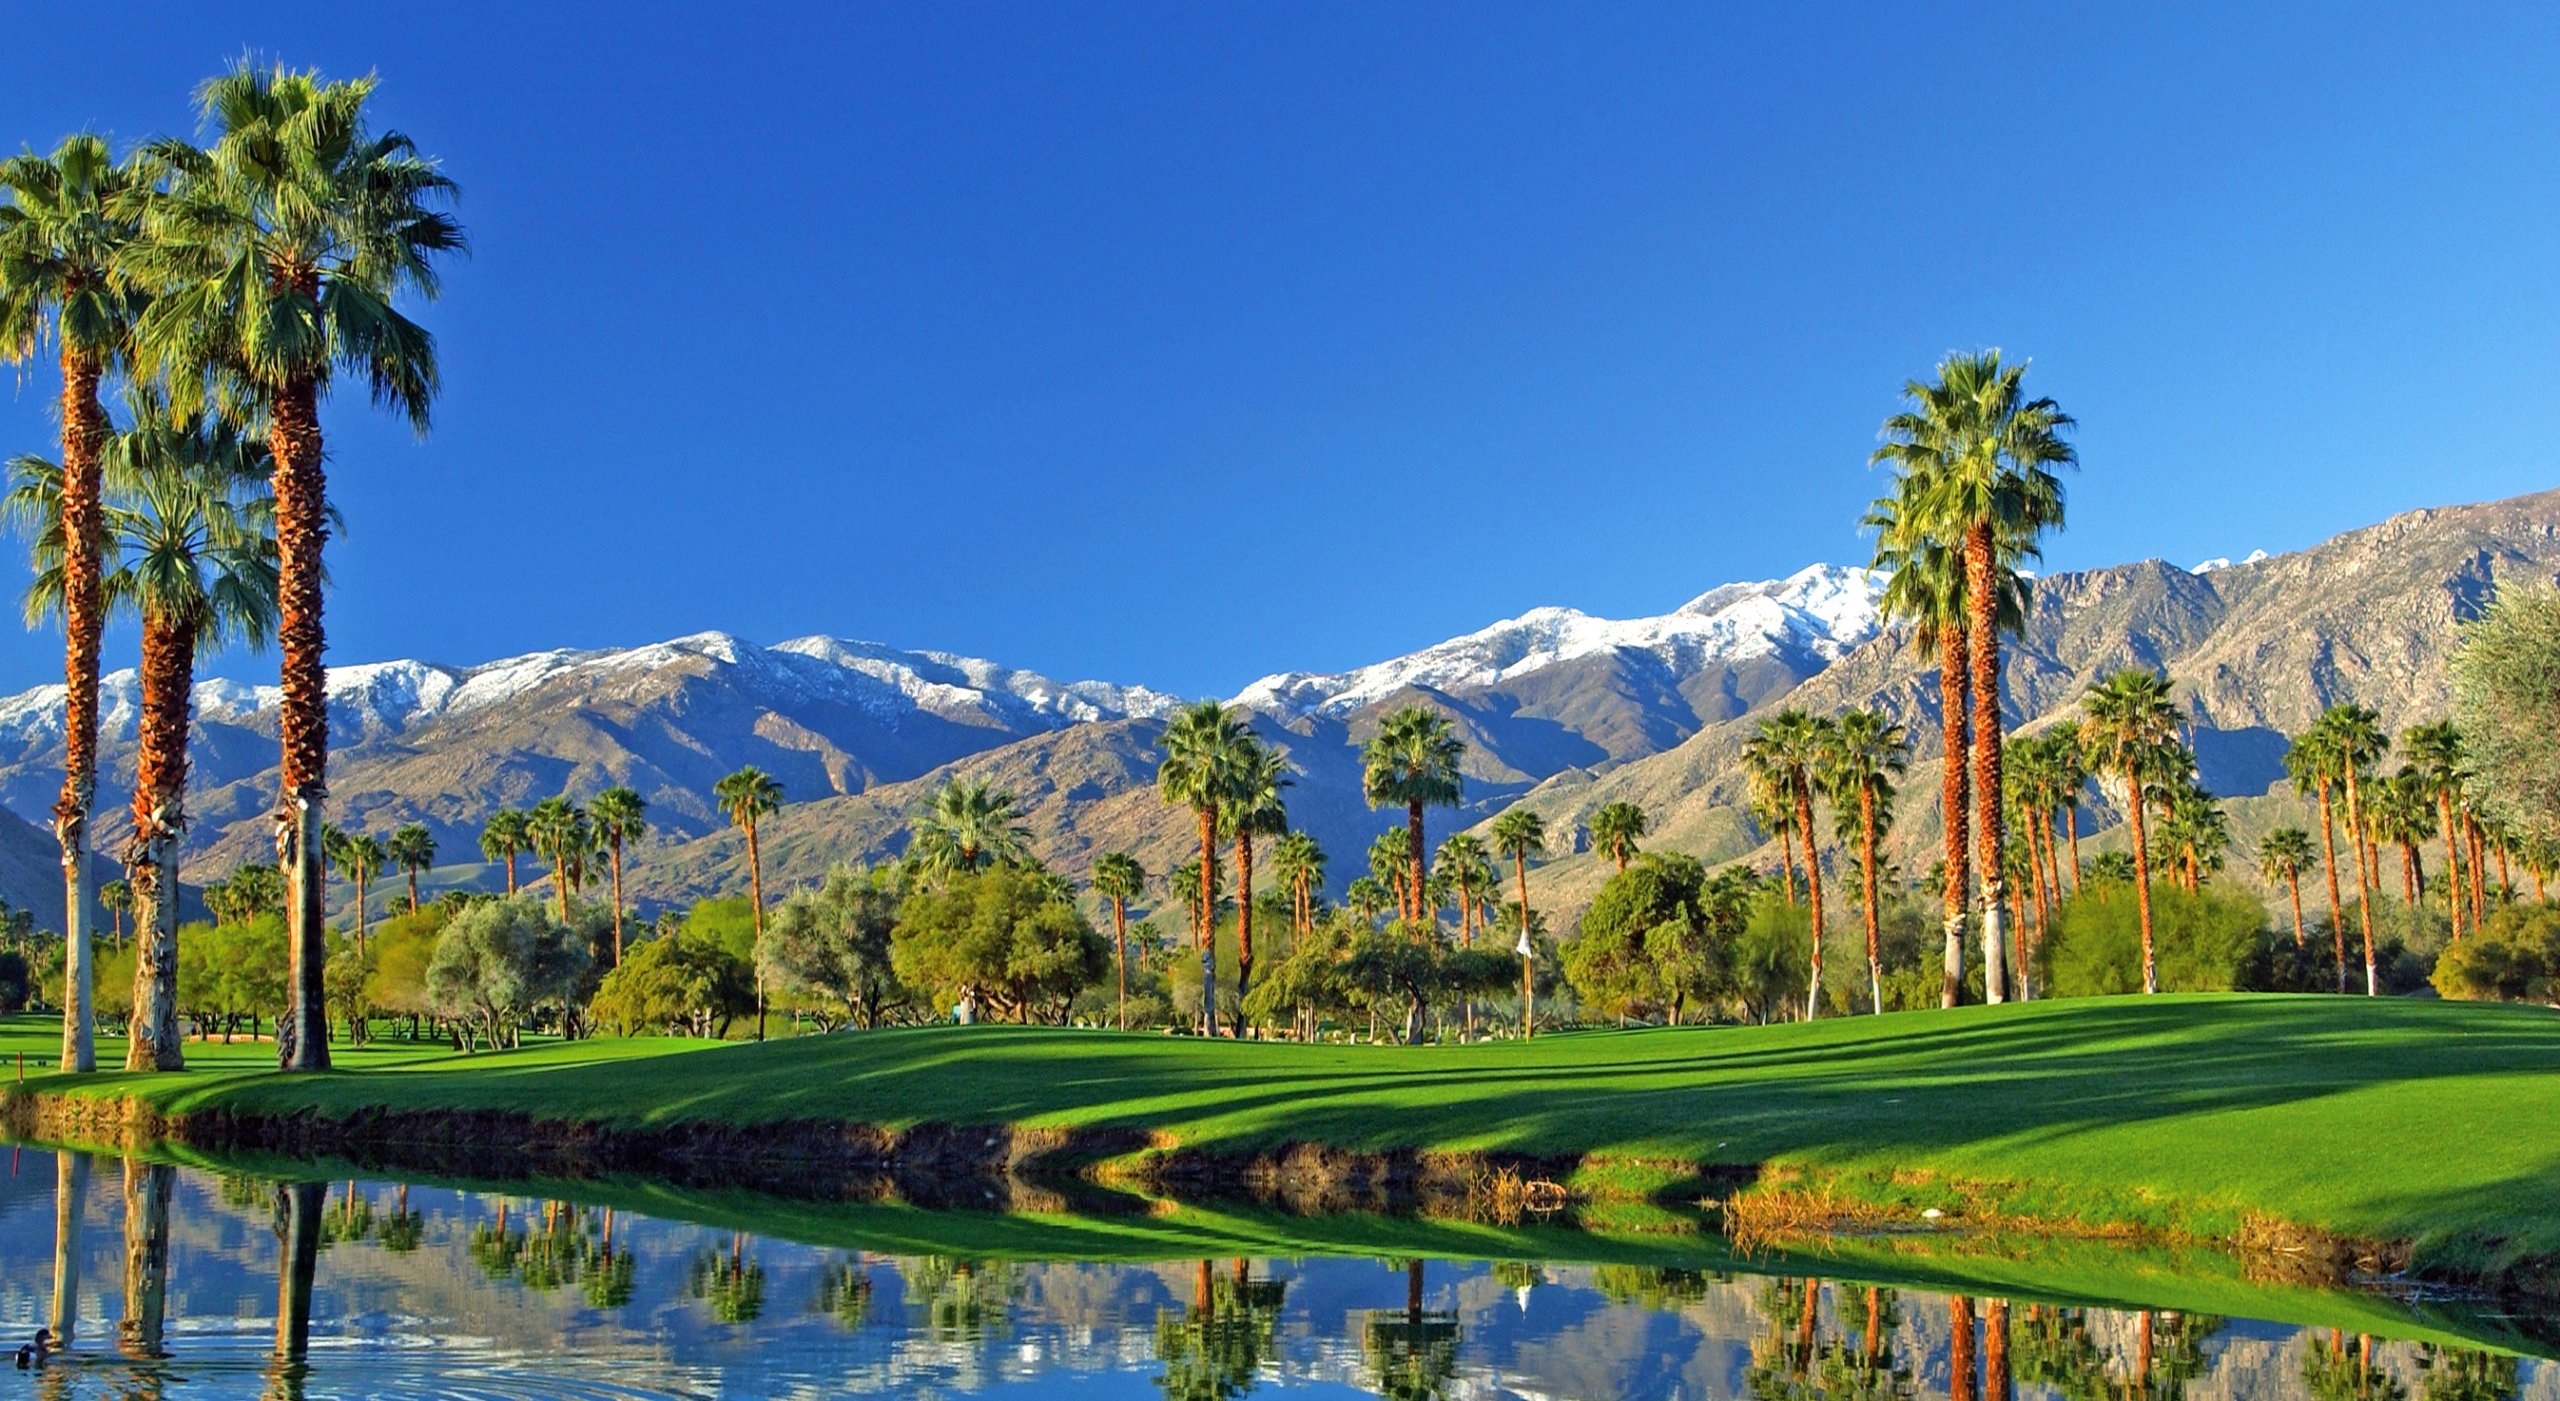 Toronto to Palm Springs, California – $295 CAD roundtrip including taxes | Non-stop flights